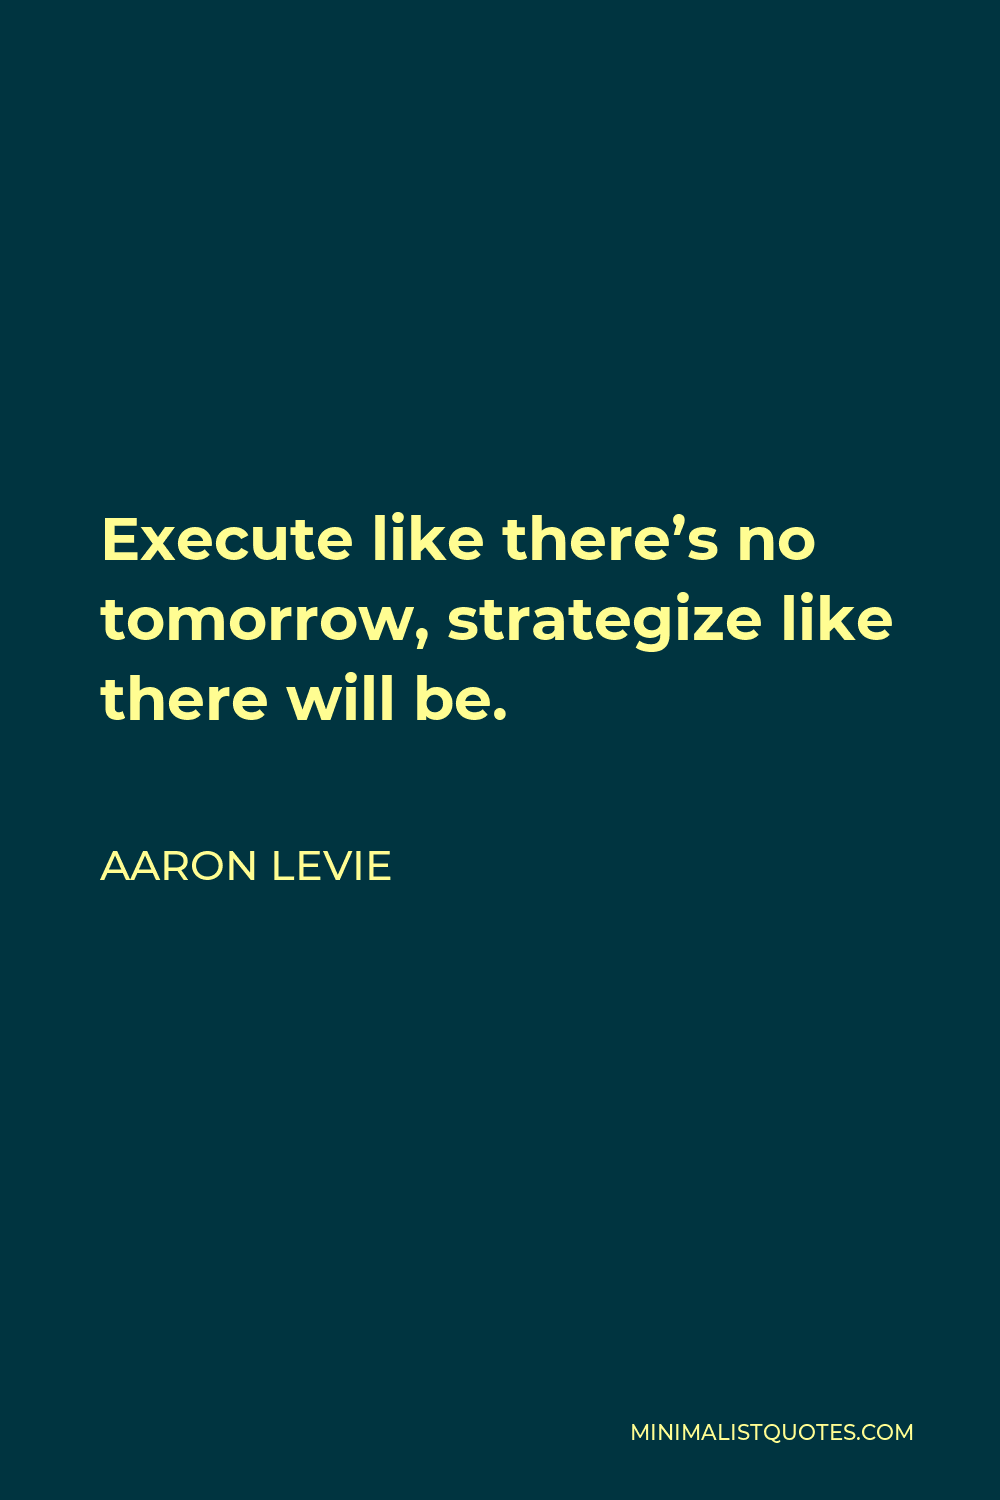 Aaron Levie Quote - Execute like there’s no tomorrow, strategize like there will be.